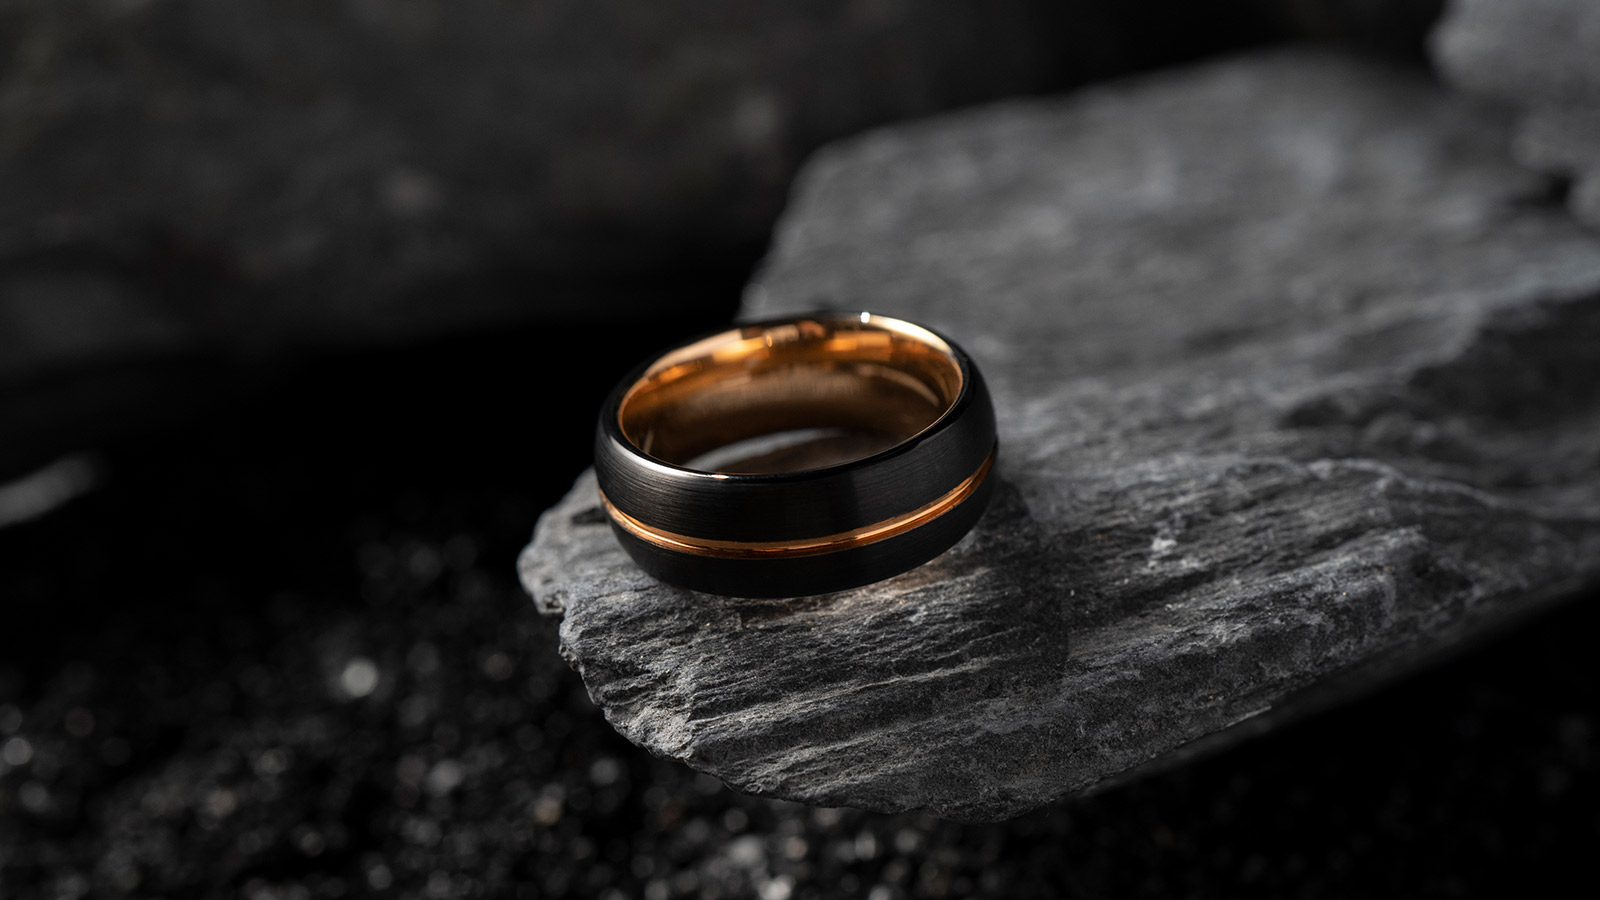 The black tungsten ring, with a dark gold setting in the middle, was placed on the stone